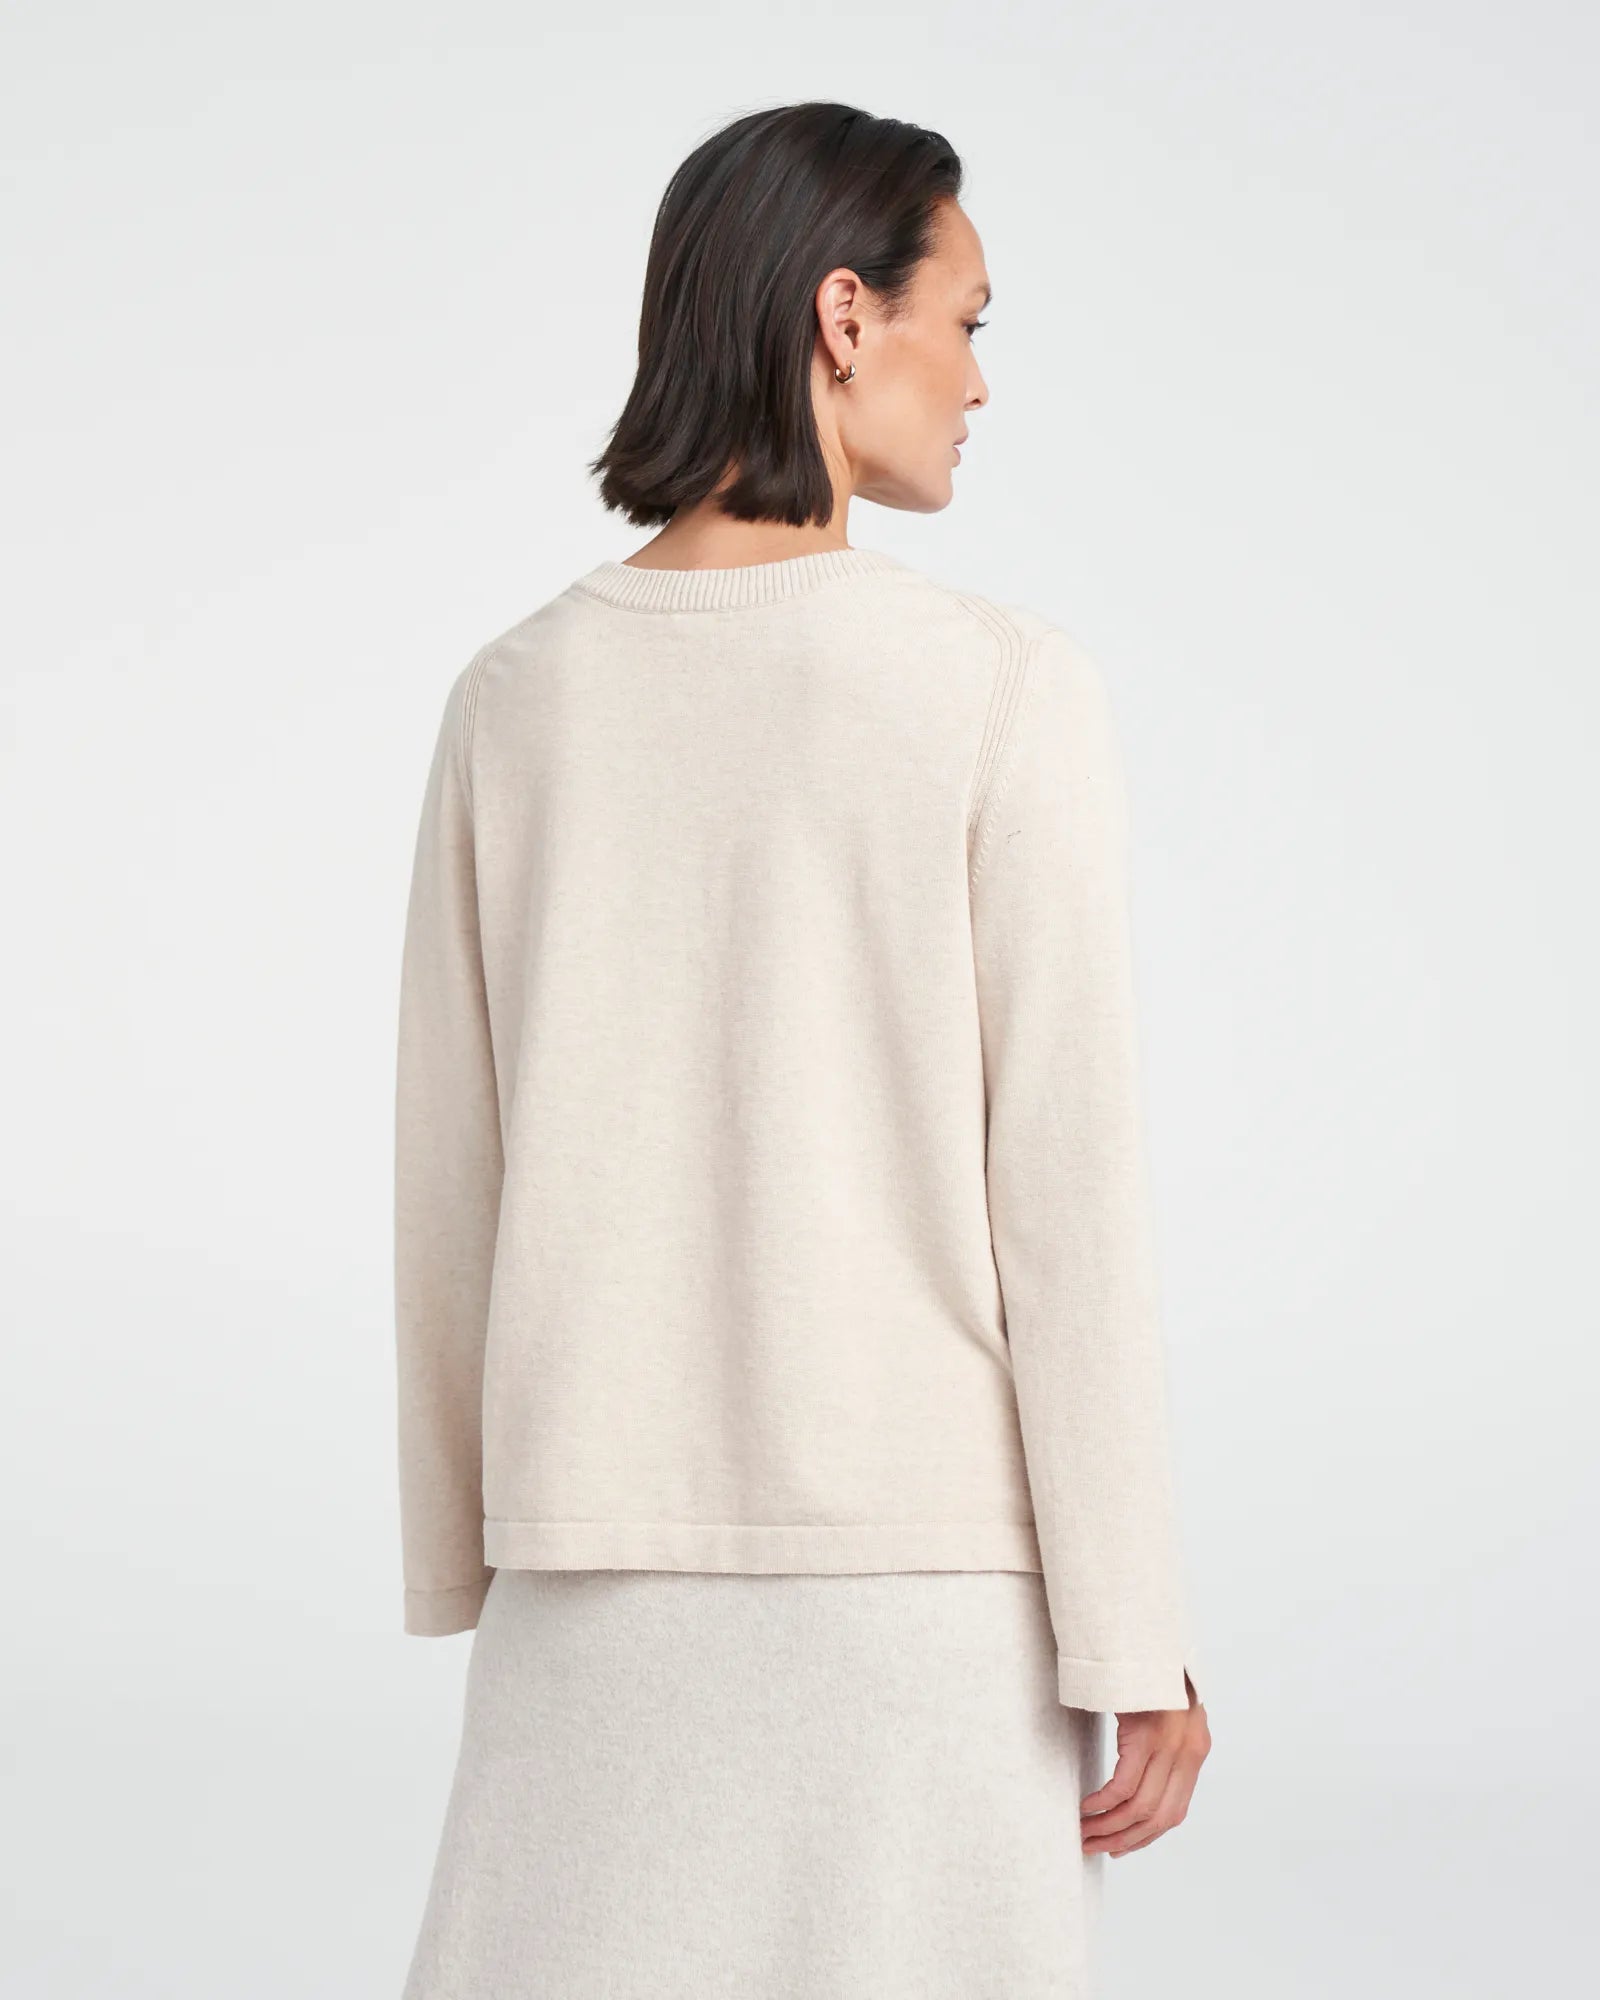 Hulda Knitted Crew Neck Sweater - Oyster